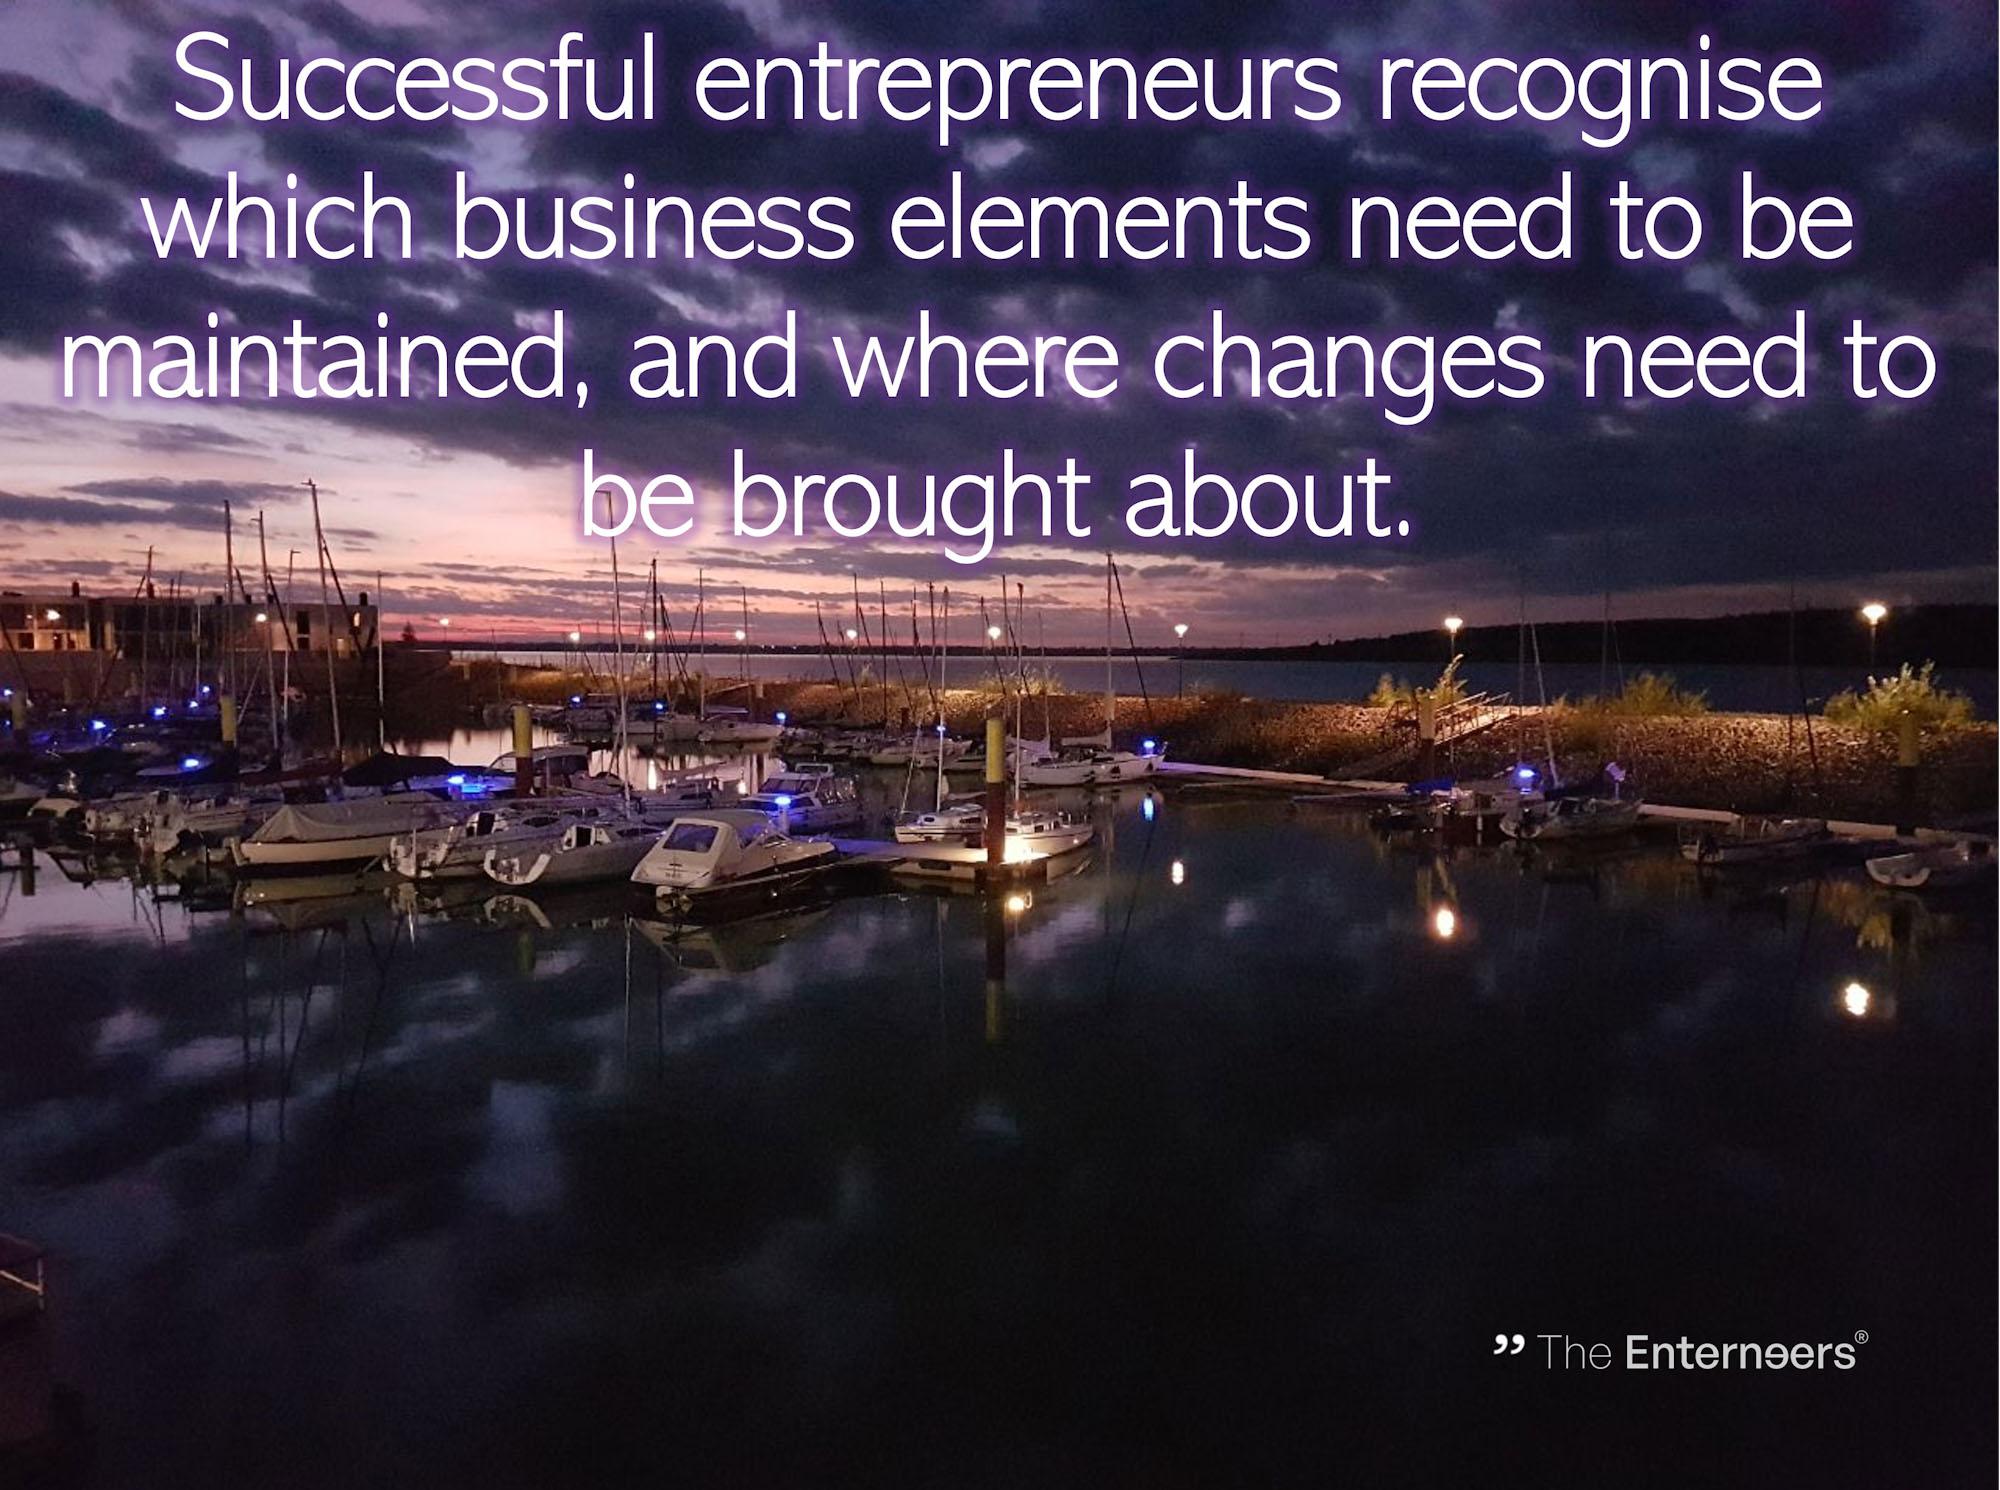 Entrepreneurs recognize business elements to be maintained and where changes are needed